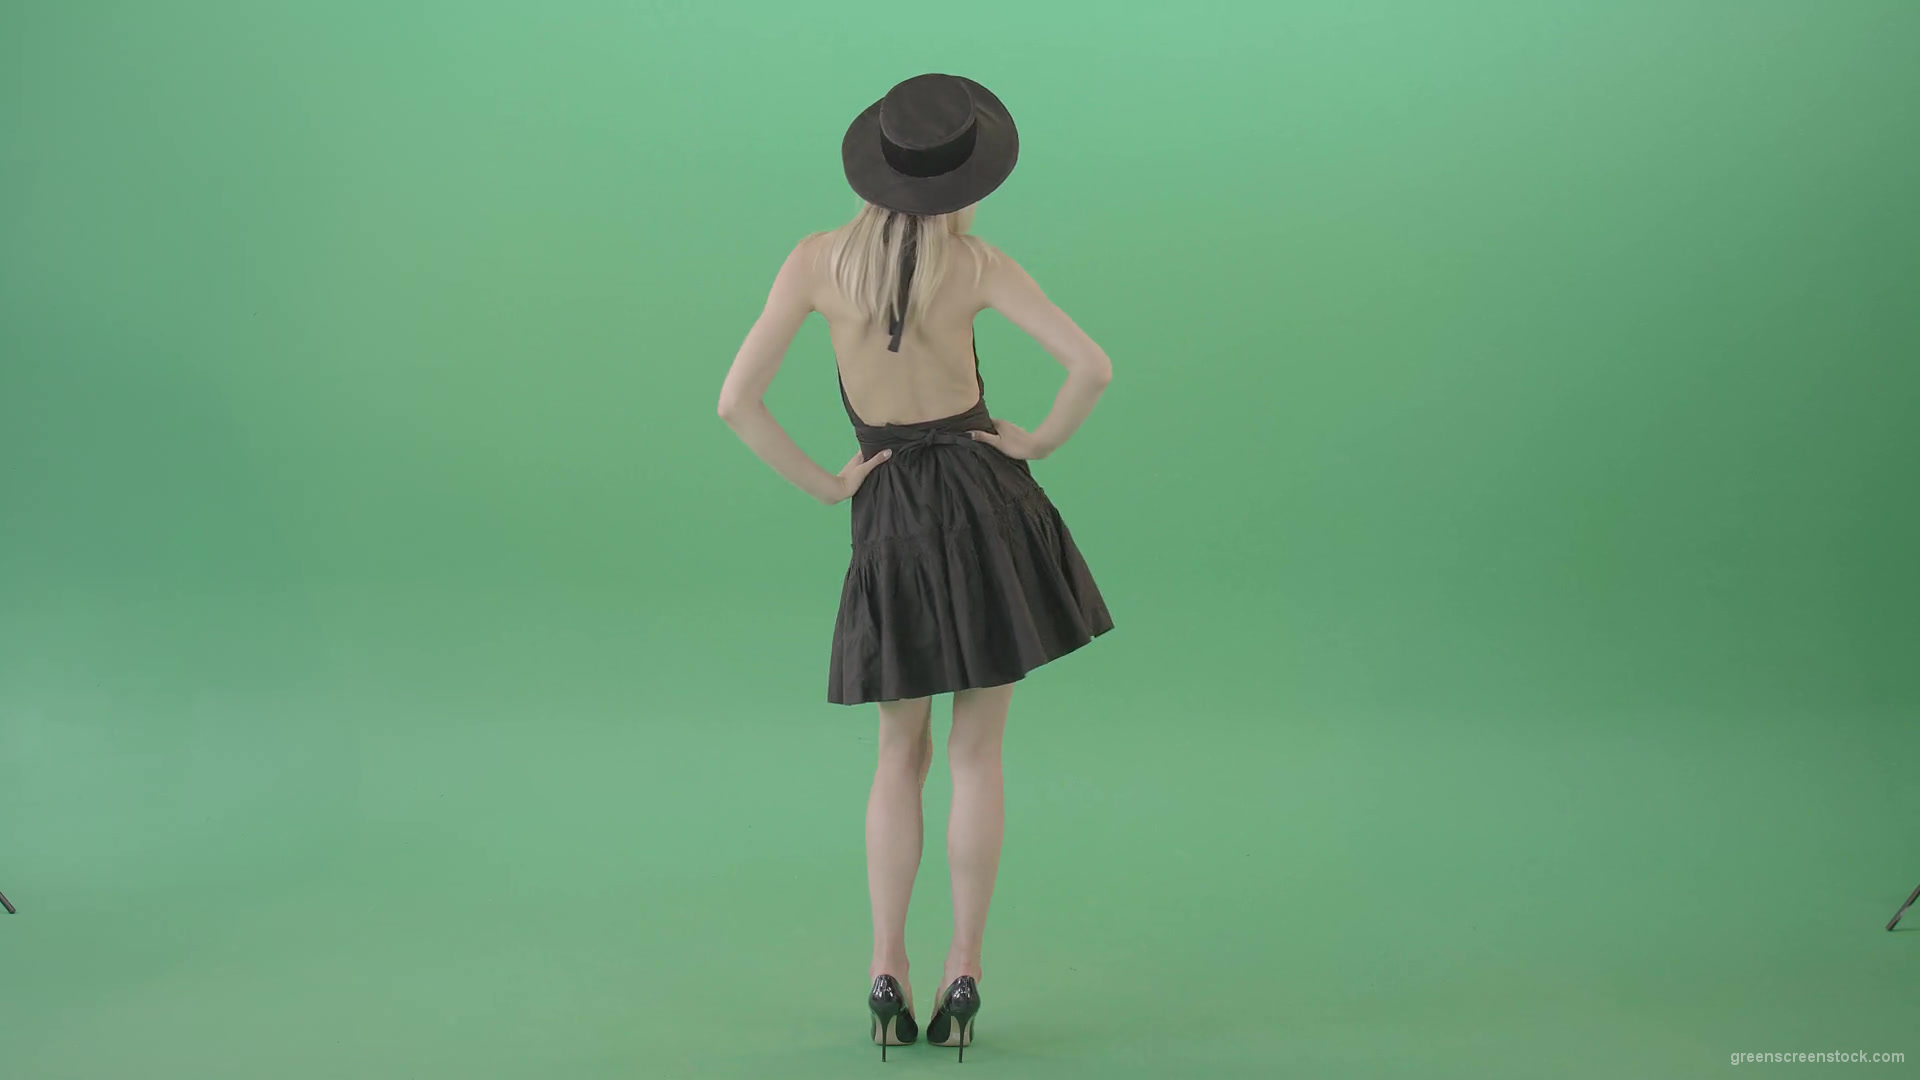 Sexy-blonde-girl-dancing-in-black-fashion-wear-dress-isolated-on-chromakey-Green-Screen-Video-Footage-1920_008 Green Screen Stock